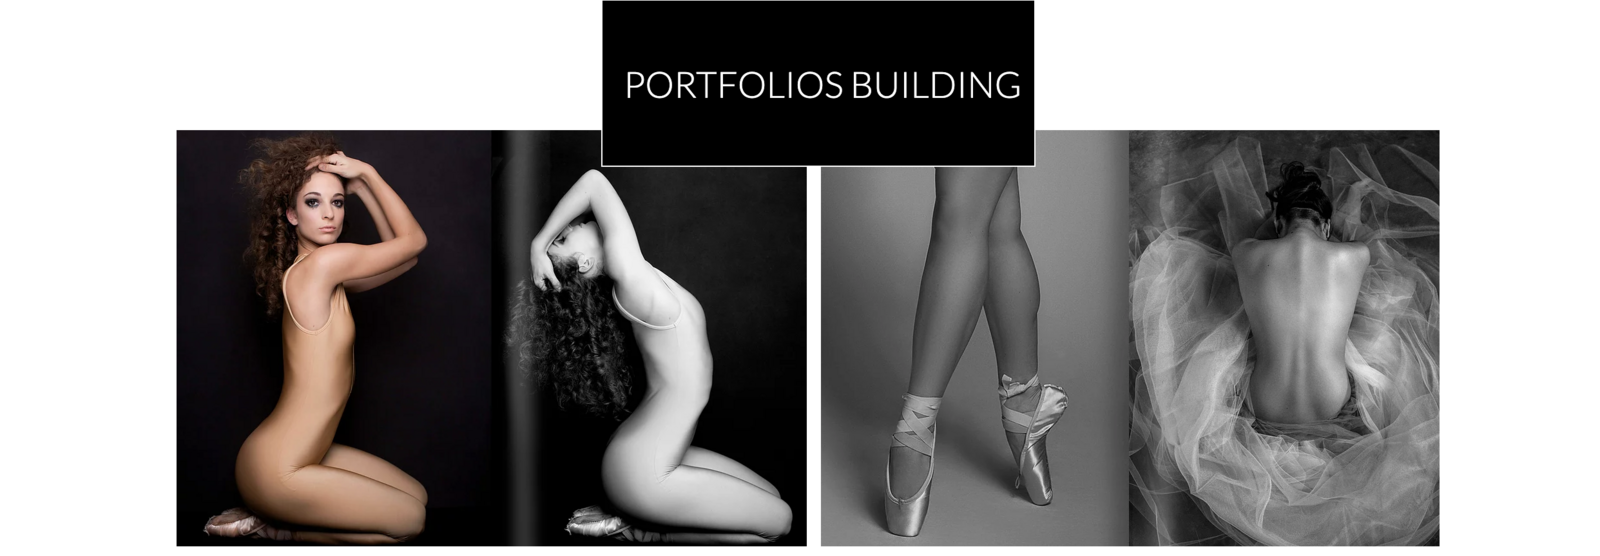 Portfolio building for models and dancer by Daisy Rey Photography